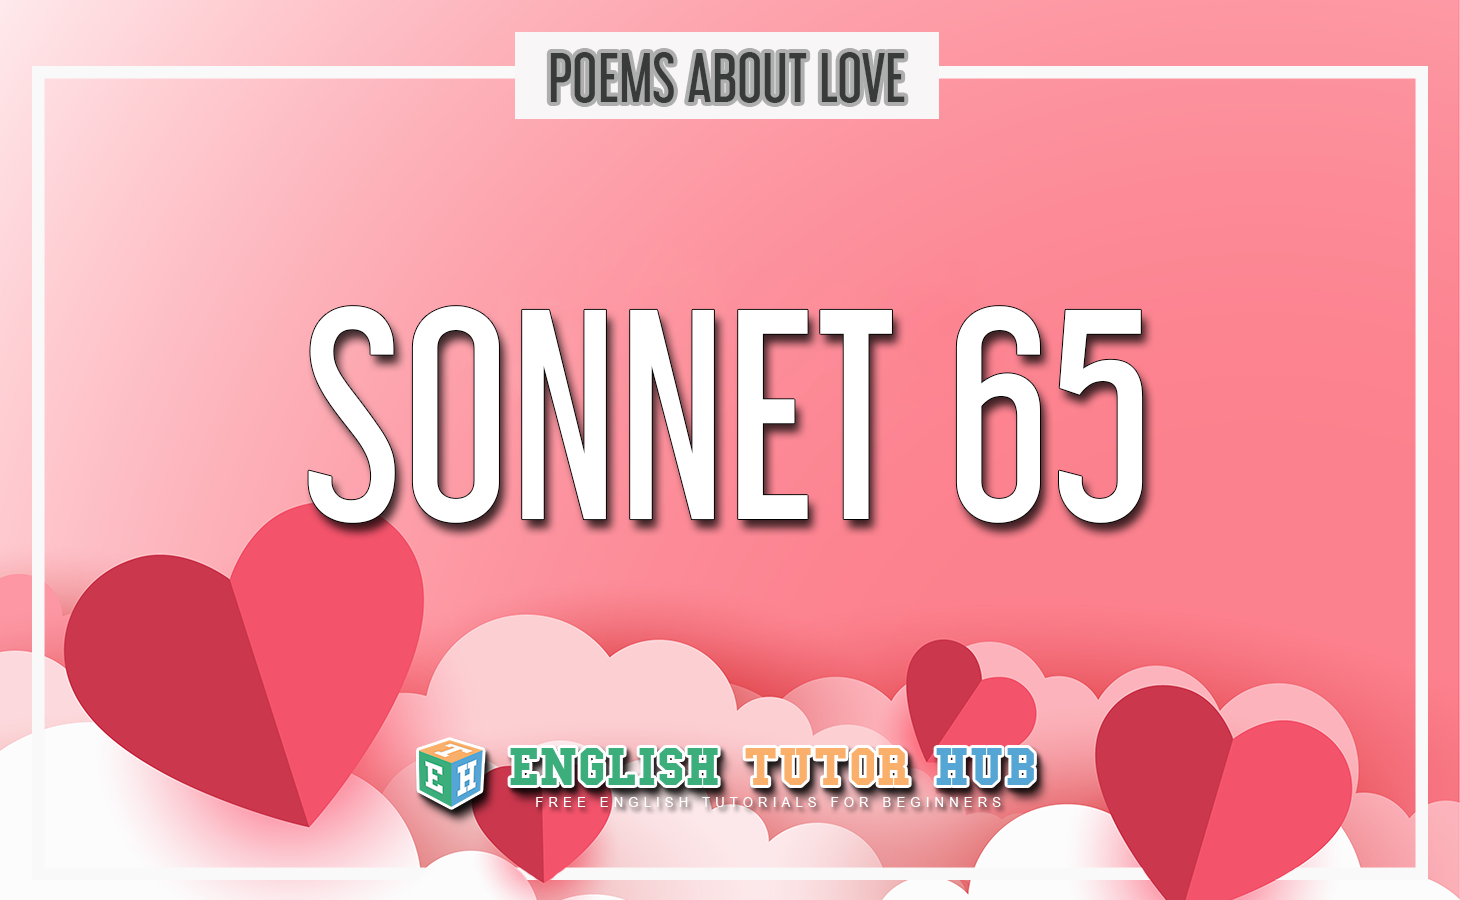 Sonnet 65 - Summary and Lesson of Poem About Love [2022]